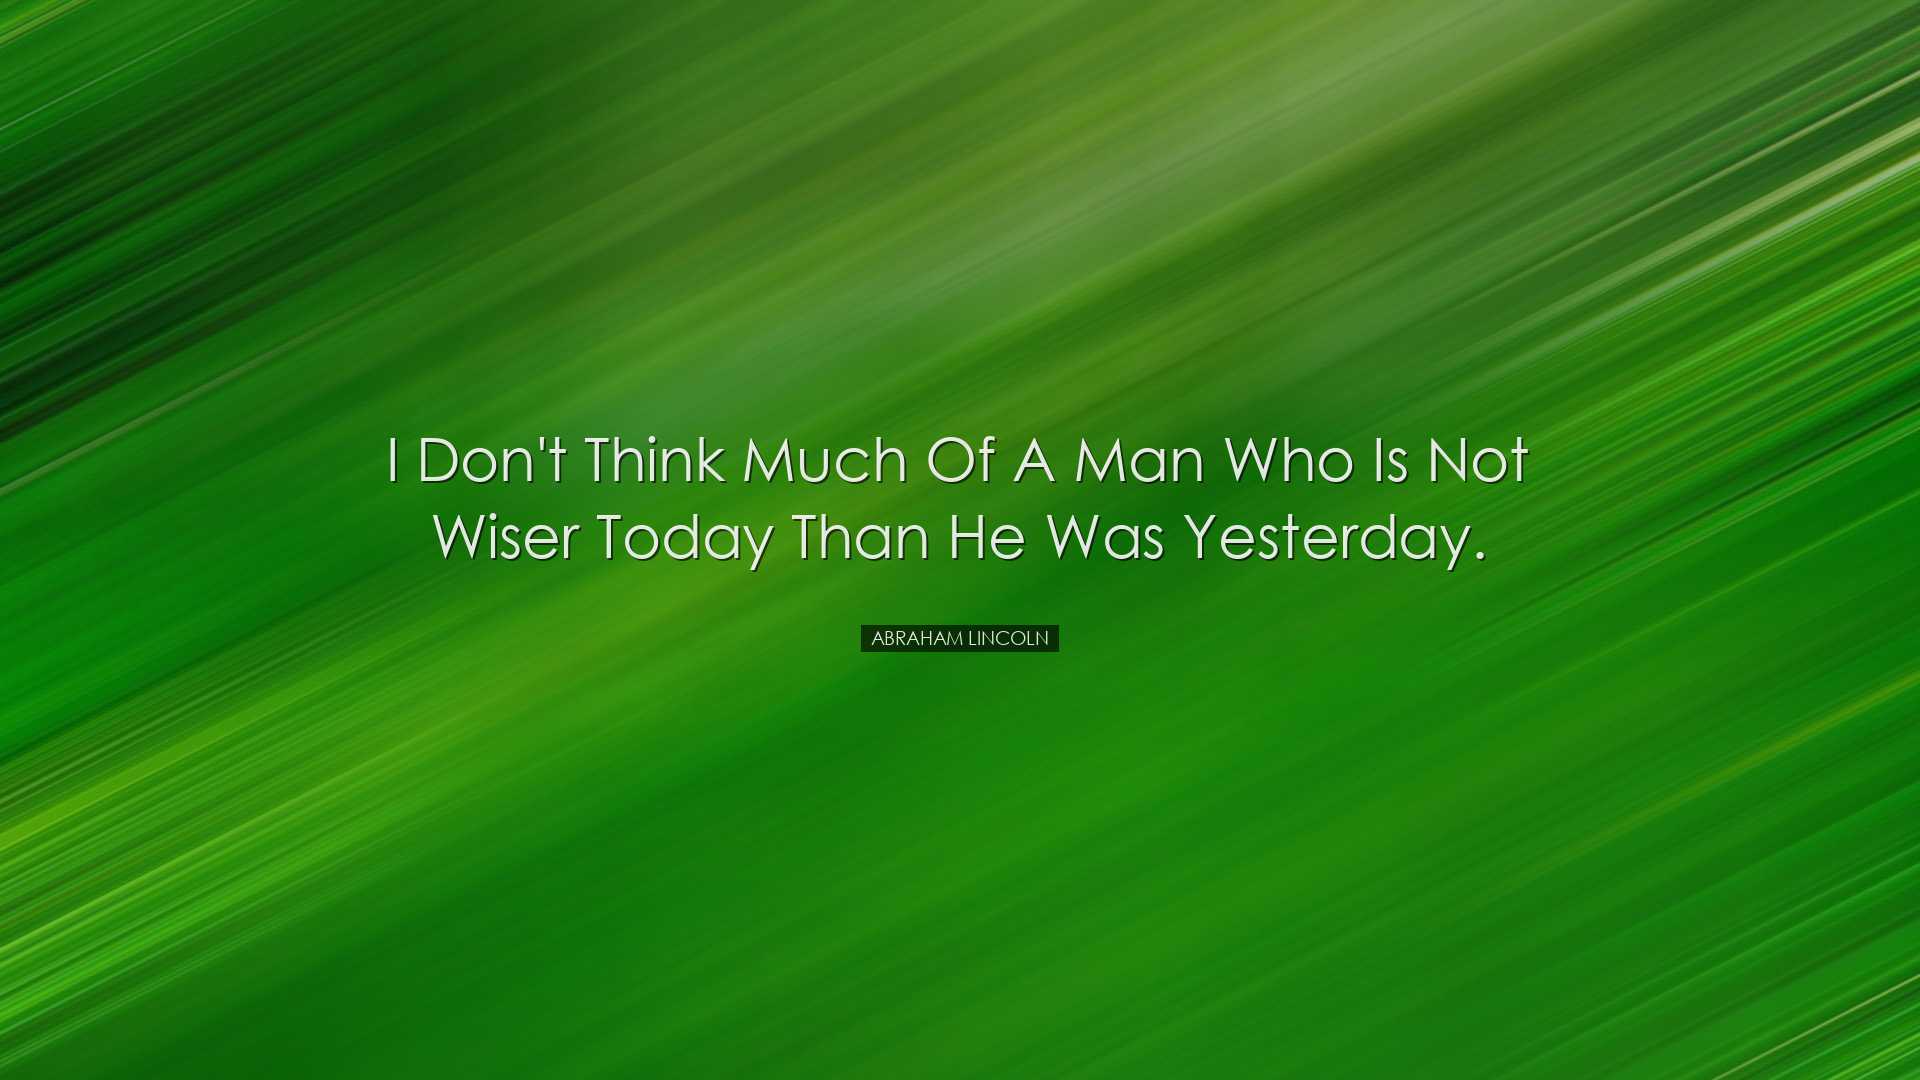 I don't think much of a man who is not wiser today than he was yes